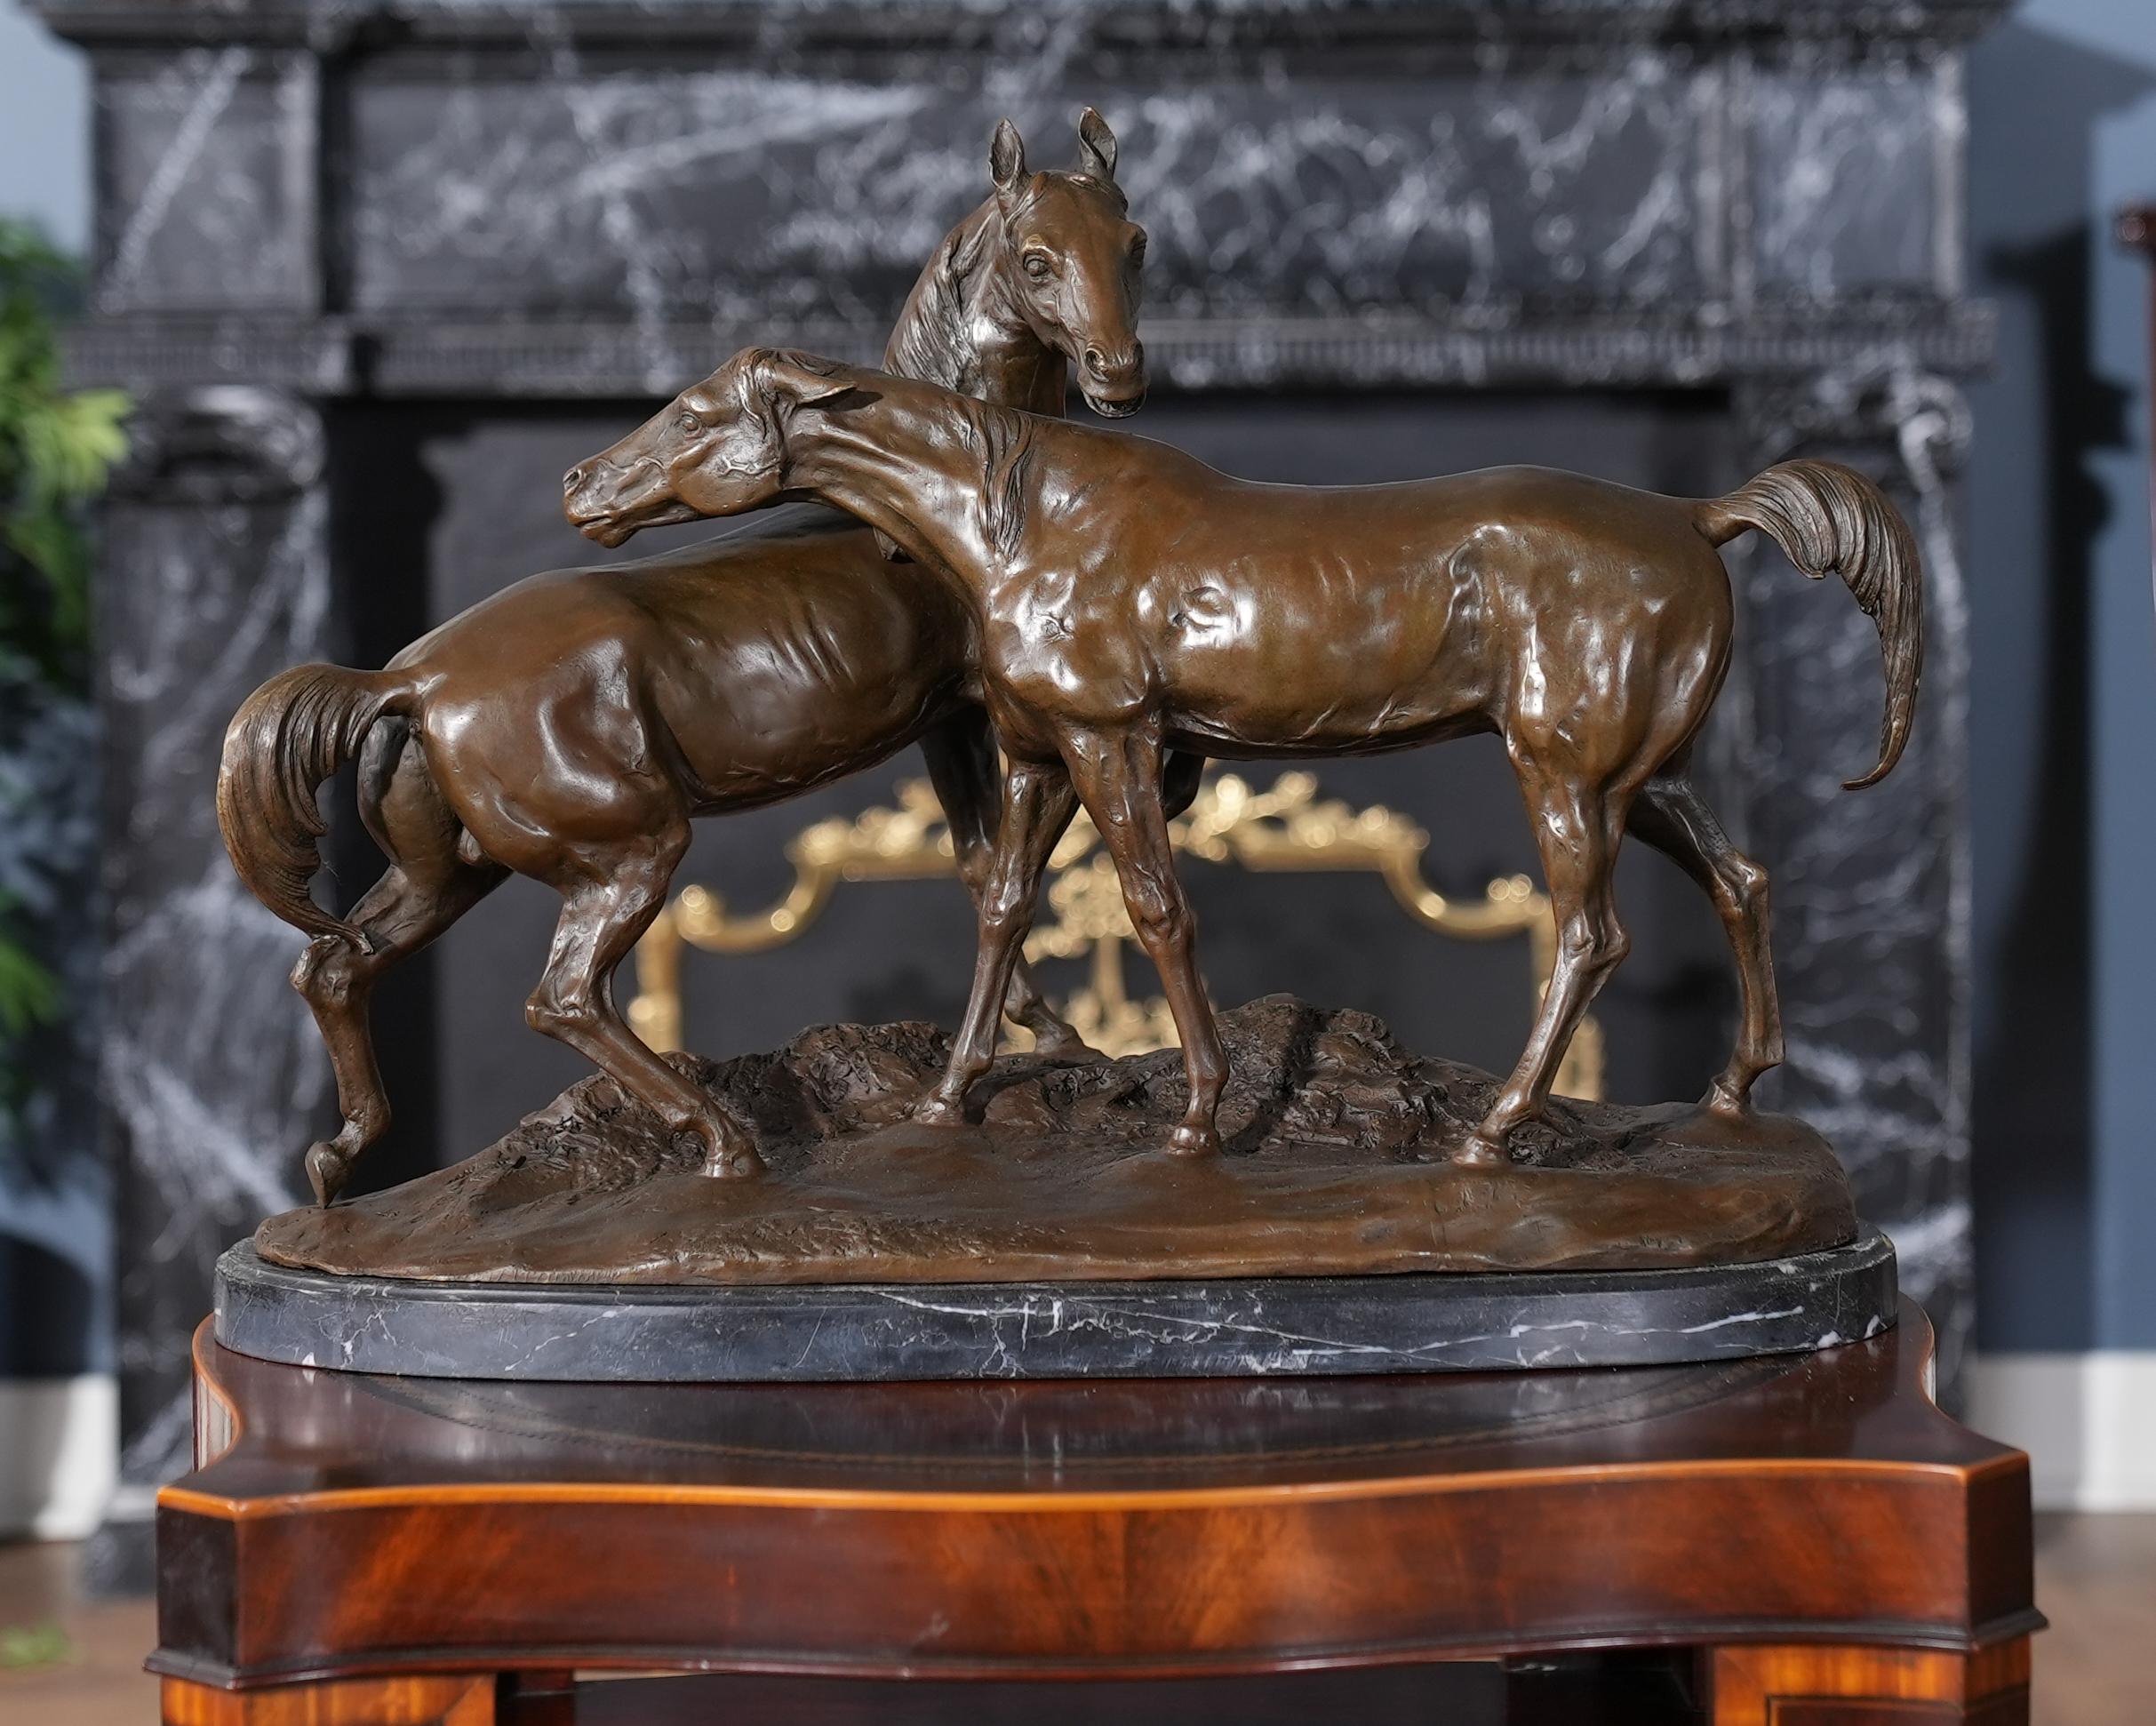 Graceful even when standing still the Two Horses on Marble Base is a striking addition to any setting. Using traditional lost wax casting methods the Two Horses statue is created in pieces and then joined together with brazing and hand chaised